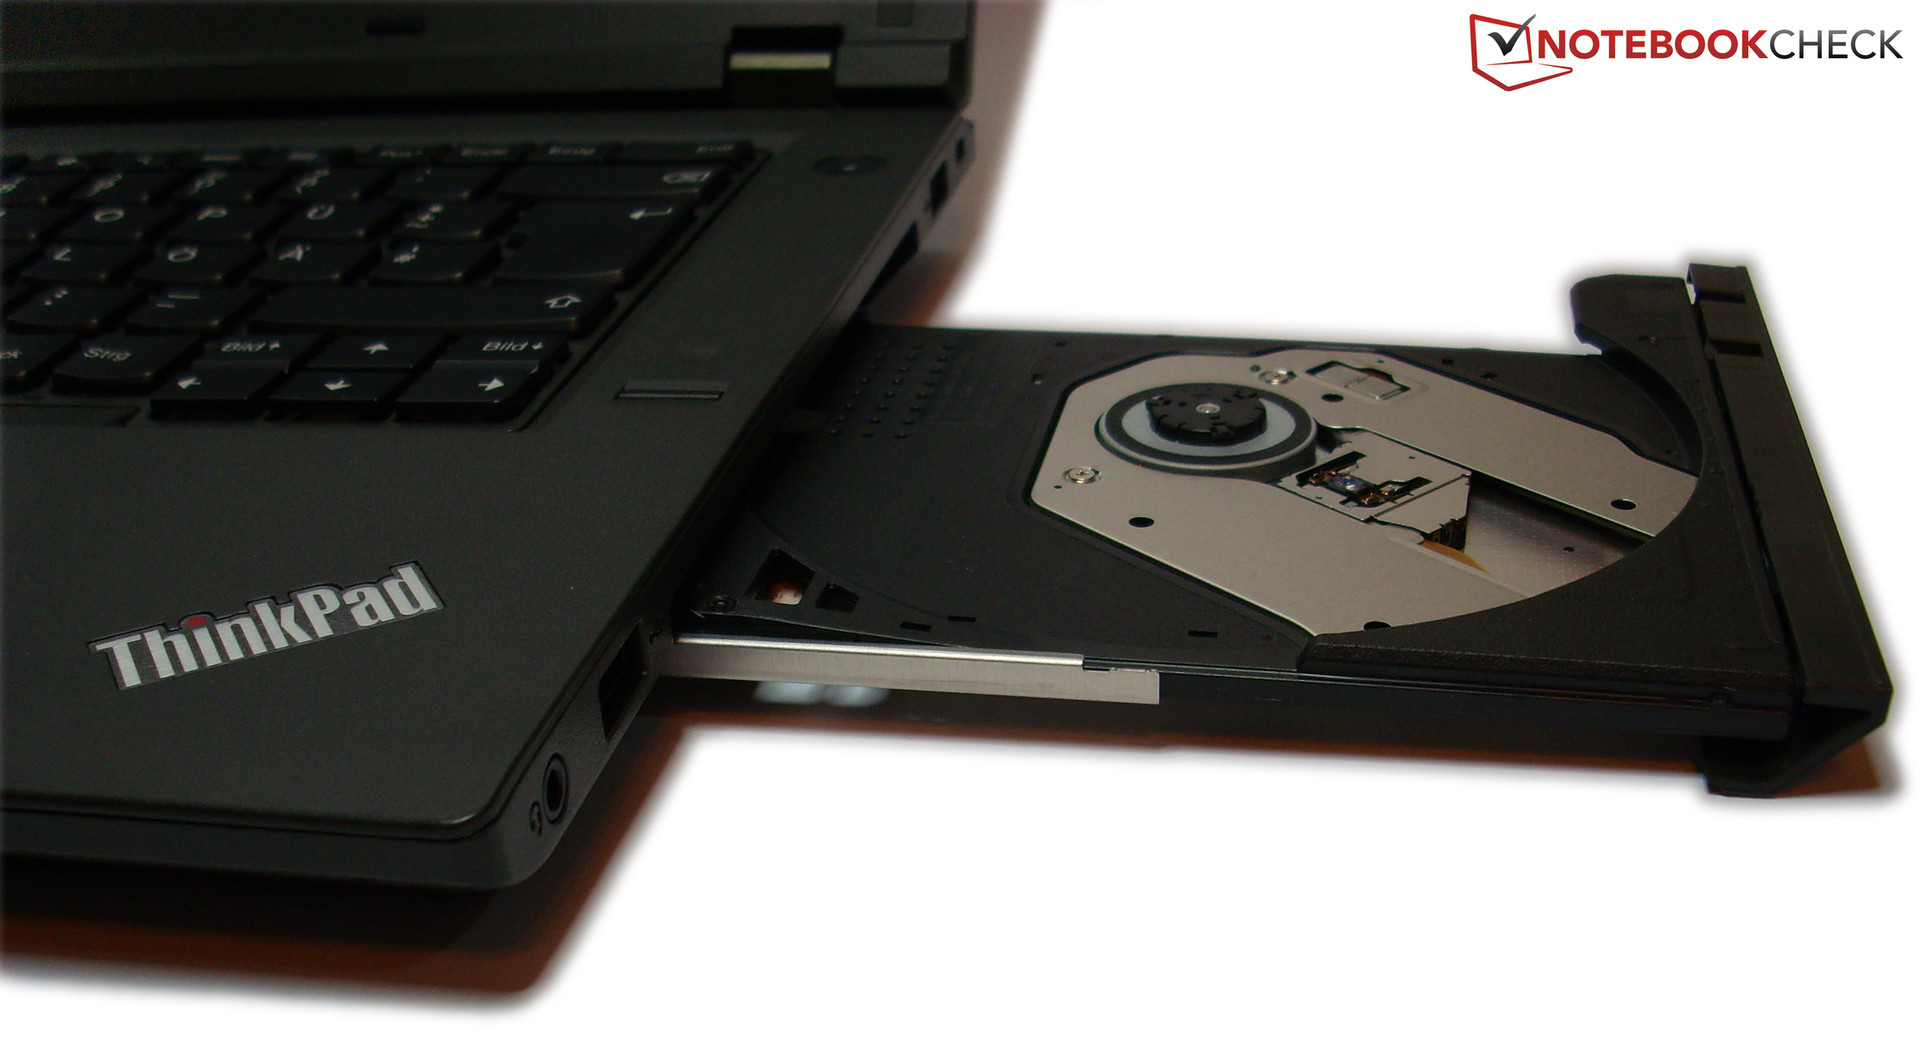 how to open dvd player on dell laptop